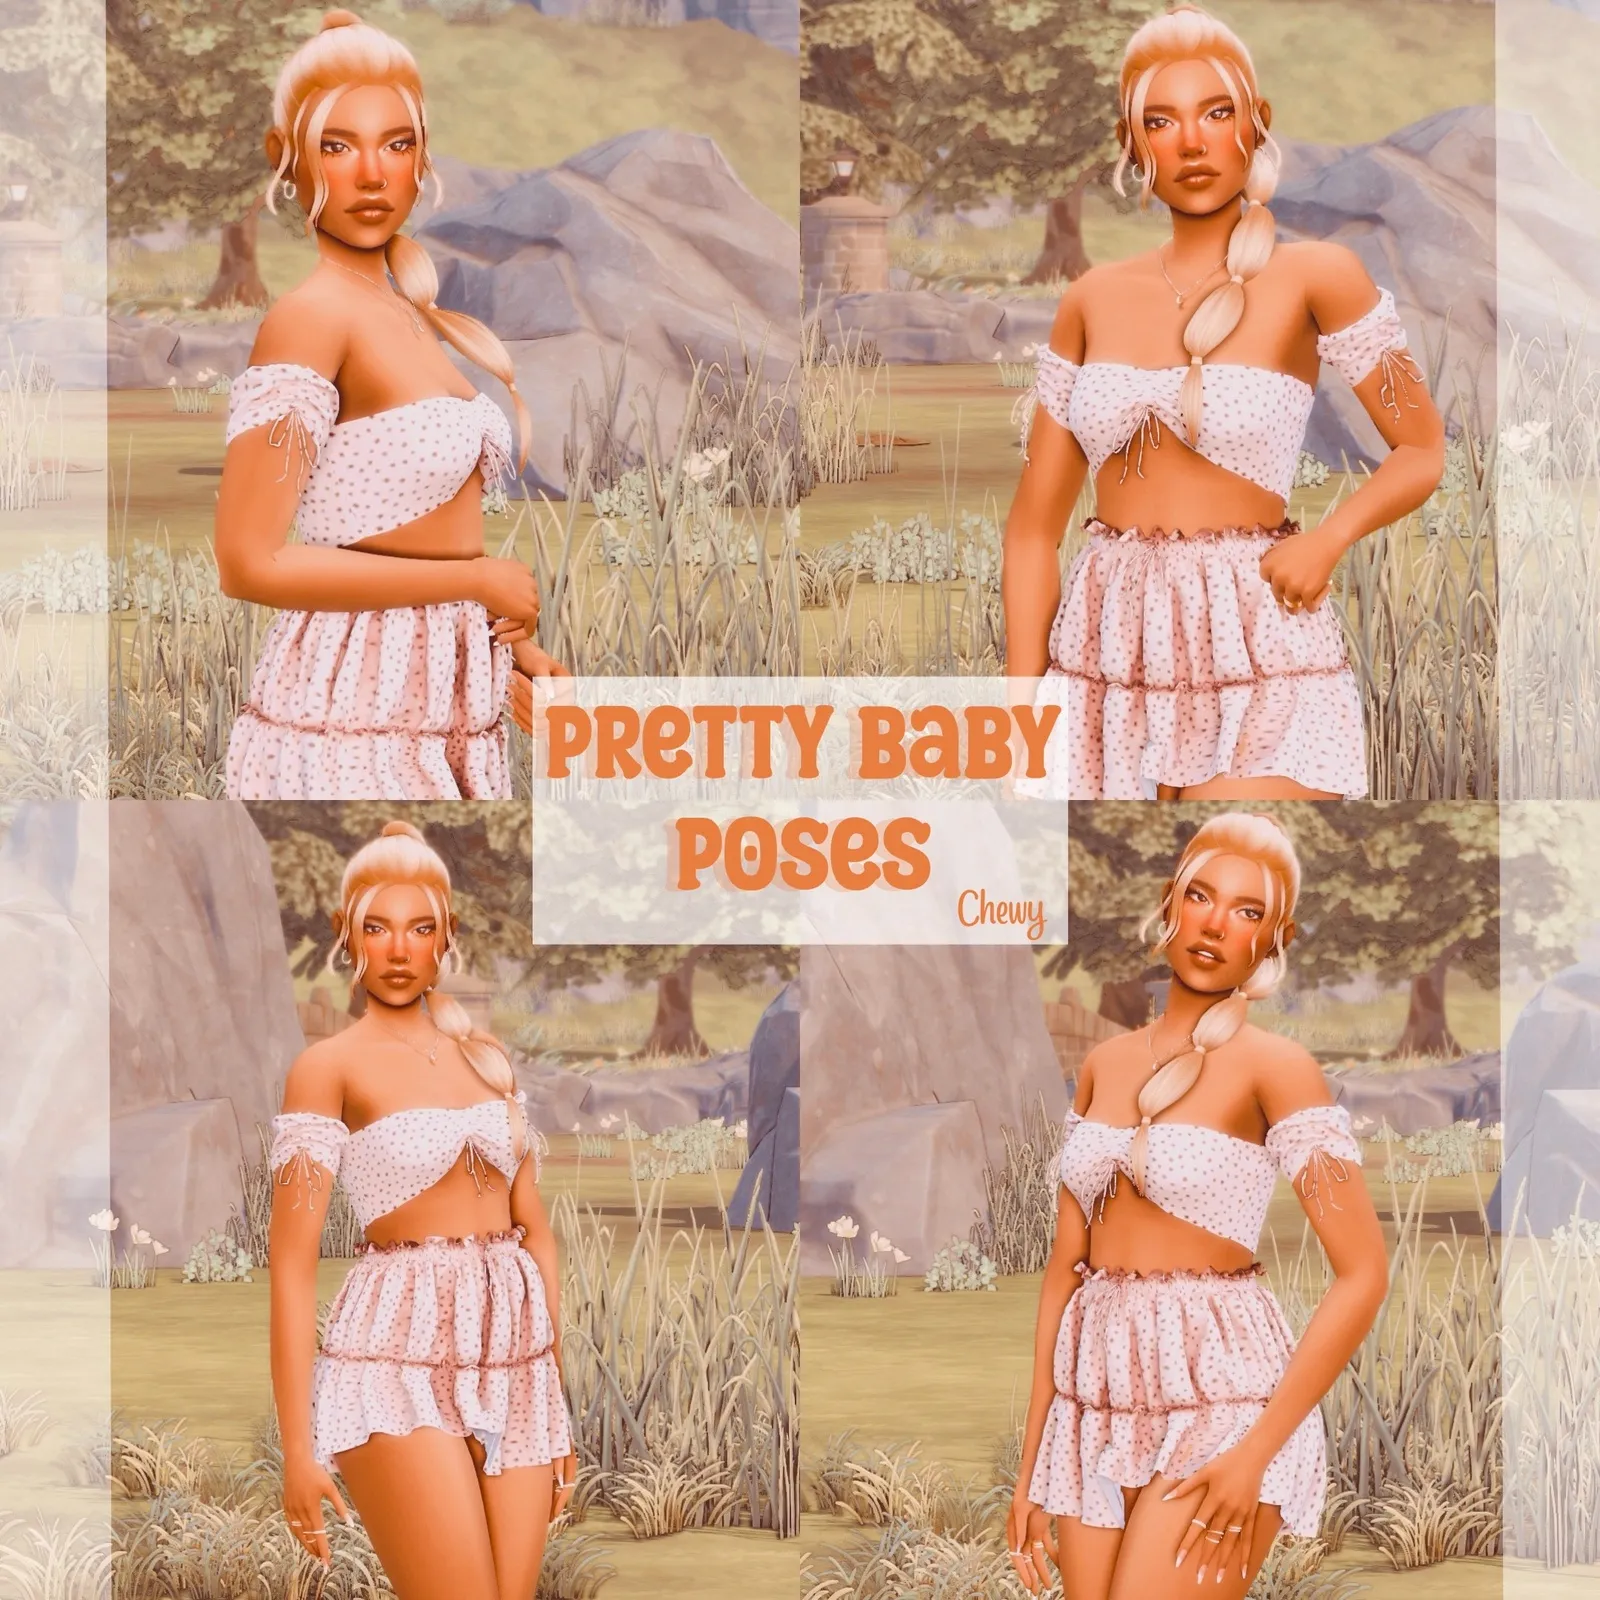 Pretty Baby poses